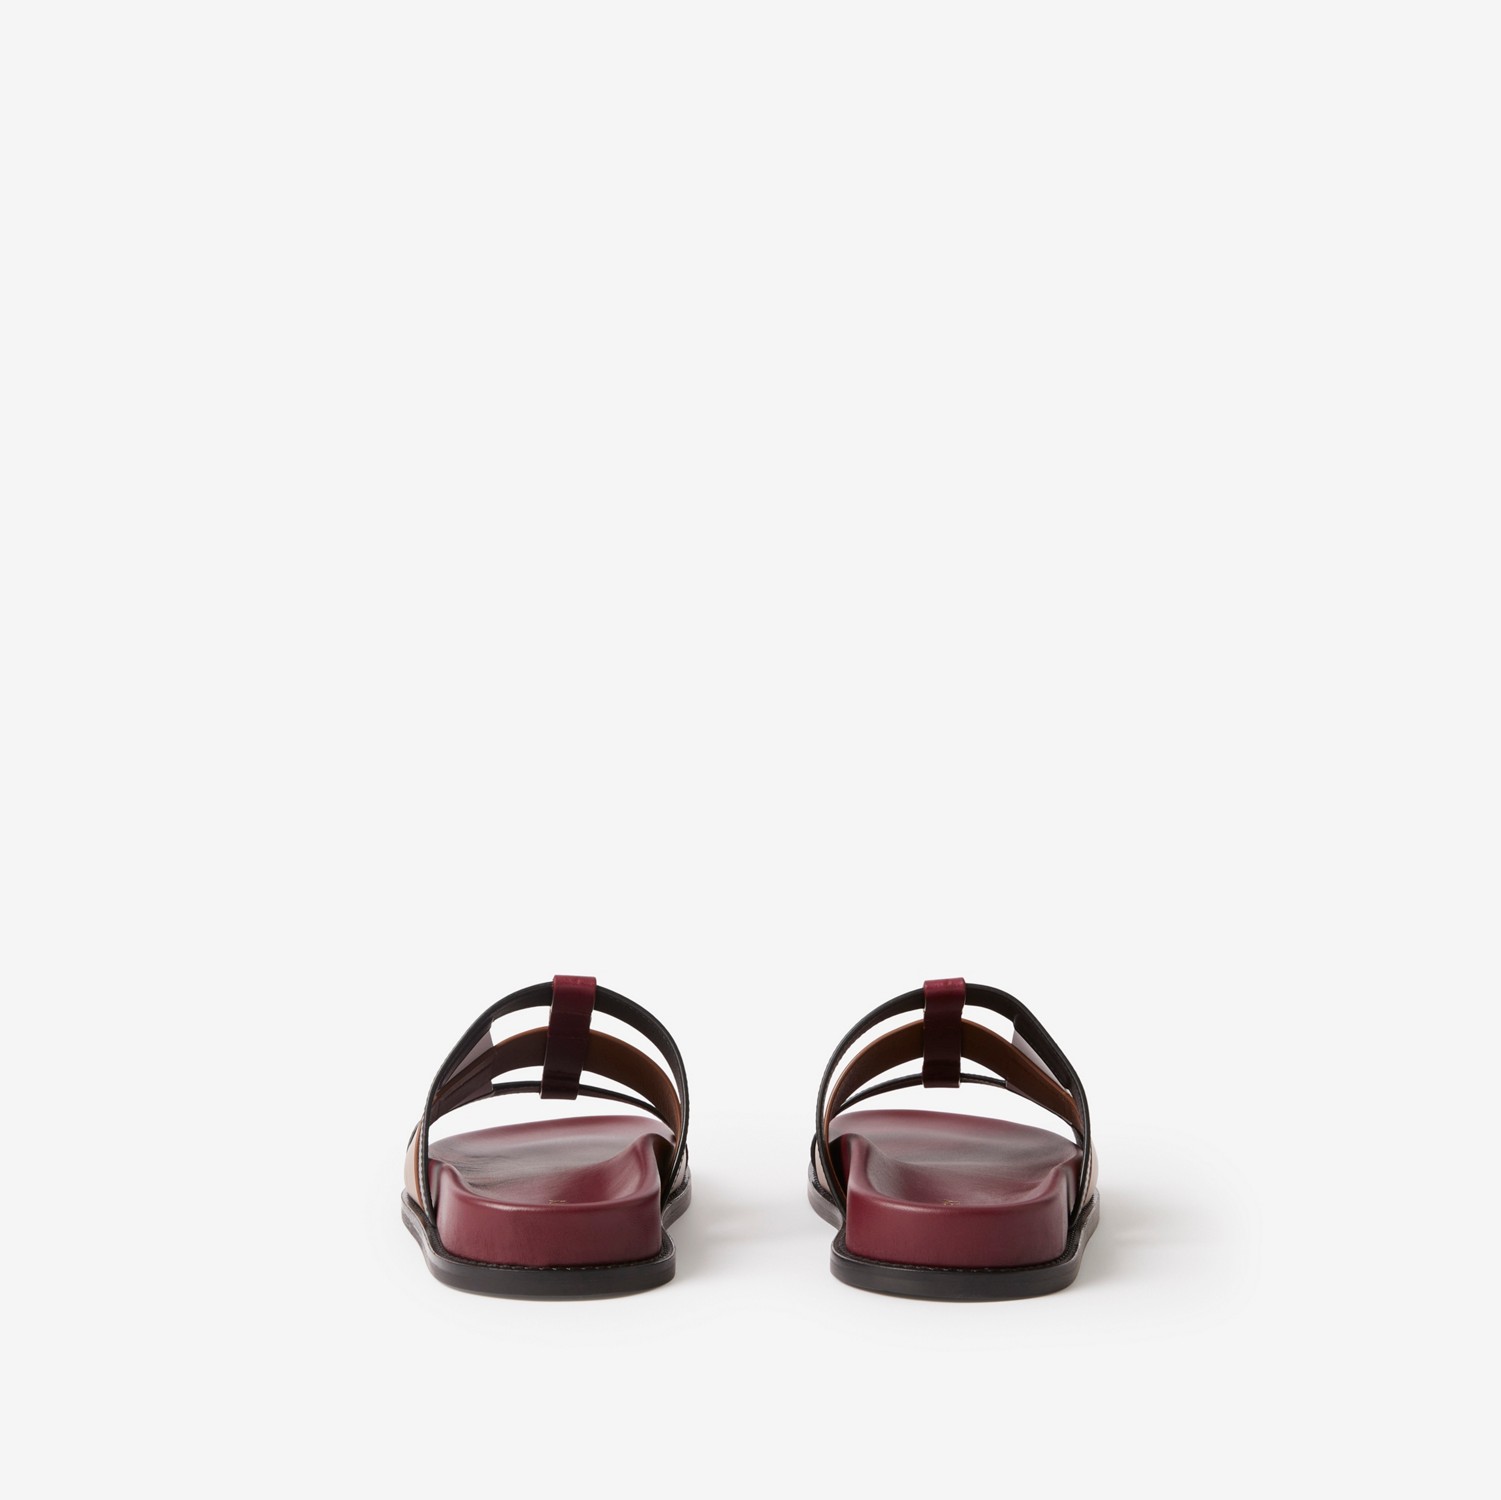 Woven Leather Slides in Dark Birch Brown/bordeaux/white - Women | Burberry® Official